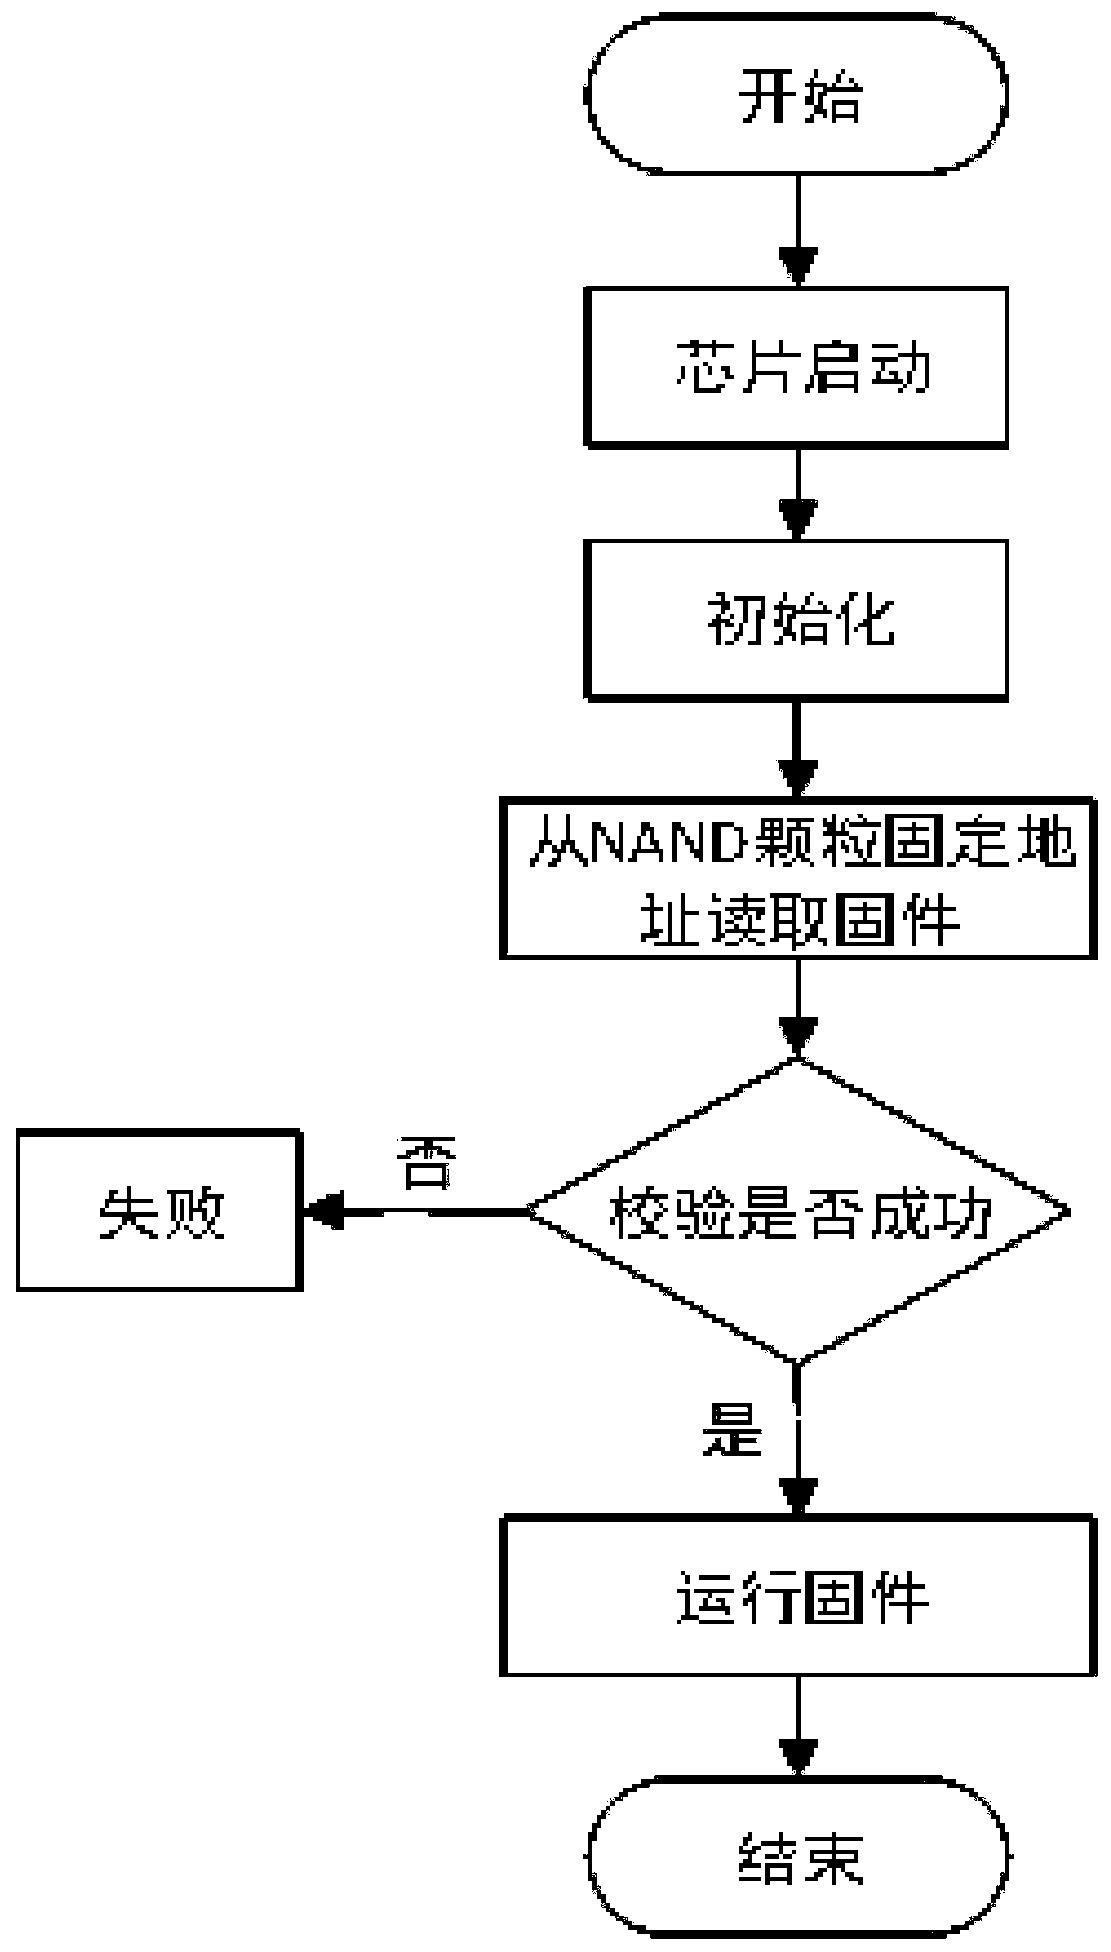 Method and system for effectively prolonging service life of NAND startup